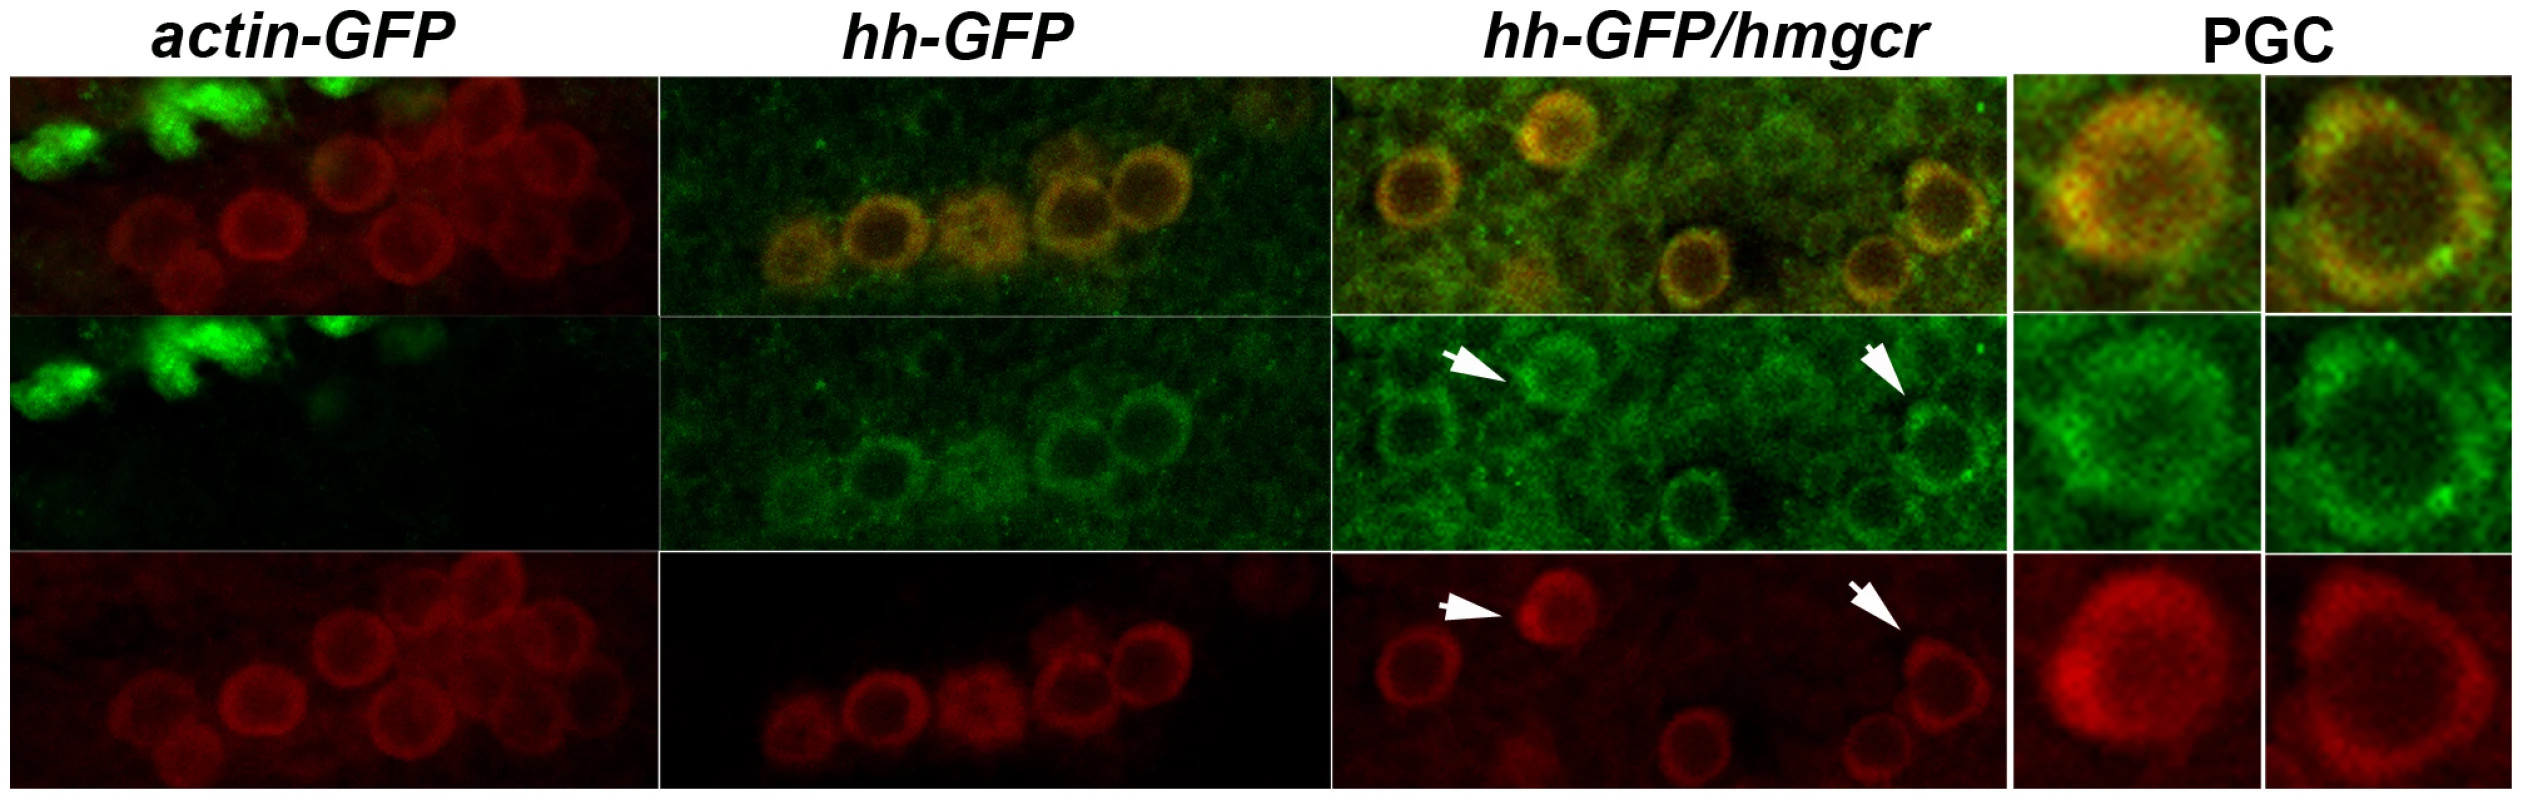 Ectopically expressed Hh-GFP localizes near PGCs.